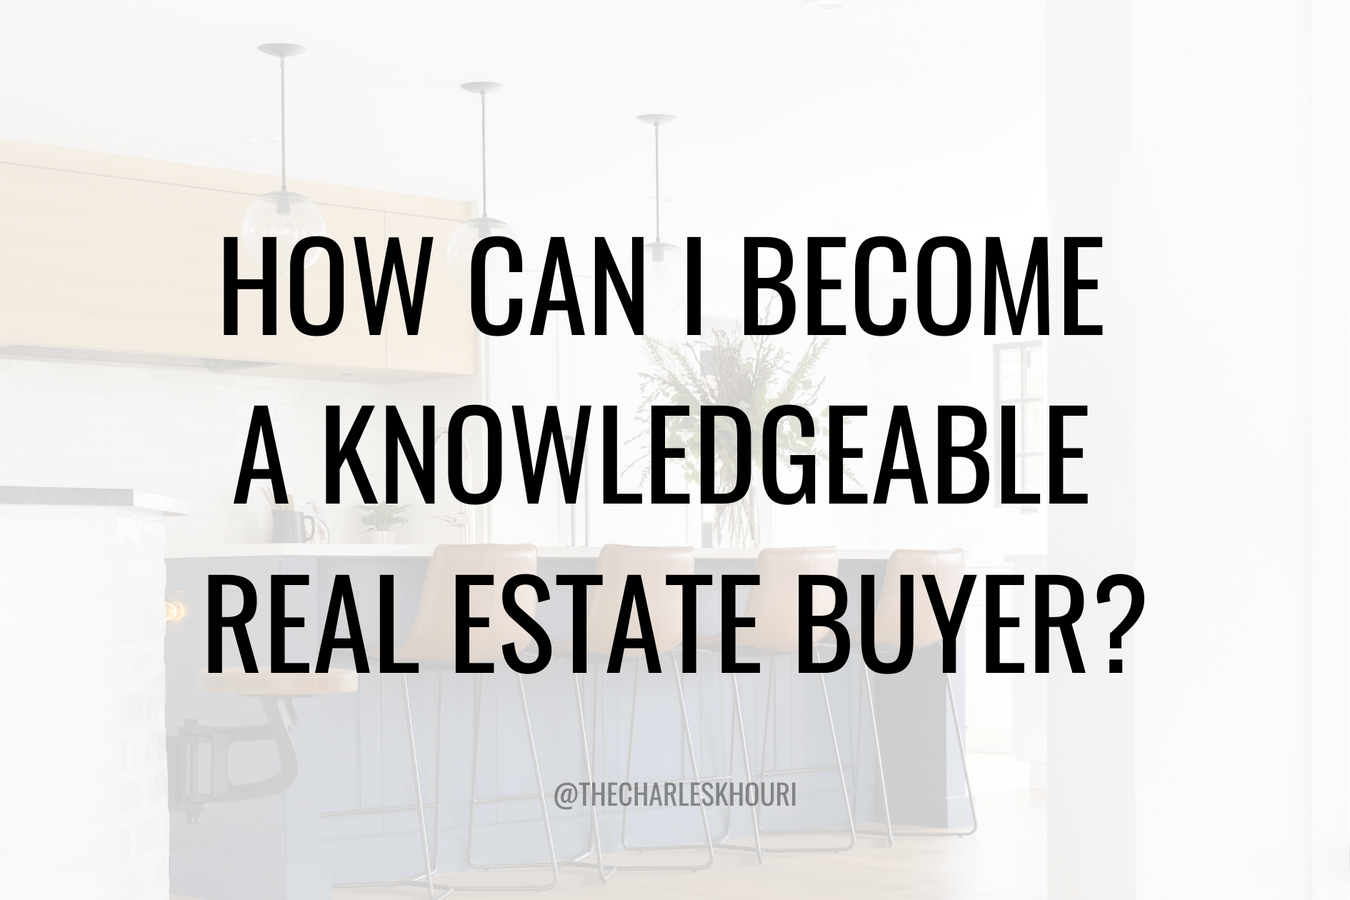 HOW CAN I BECOME A KNOWLEDGEABLE REAL ESTATE BUYER?